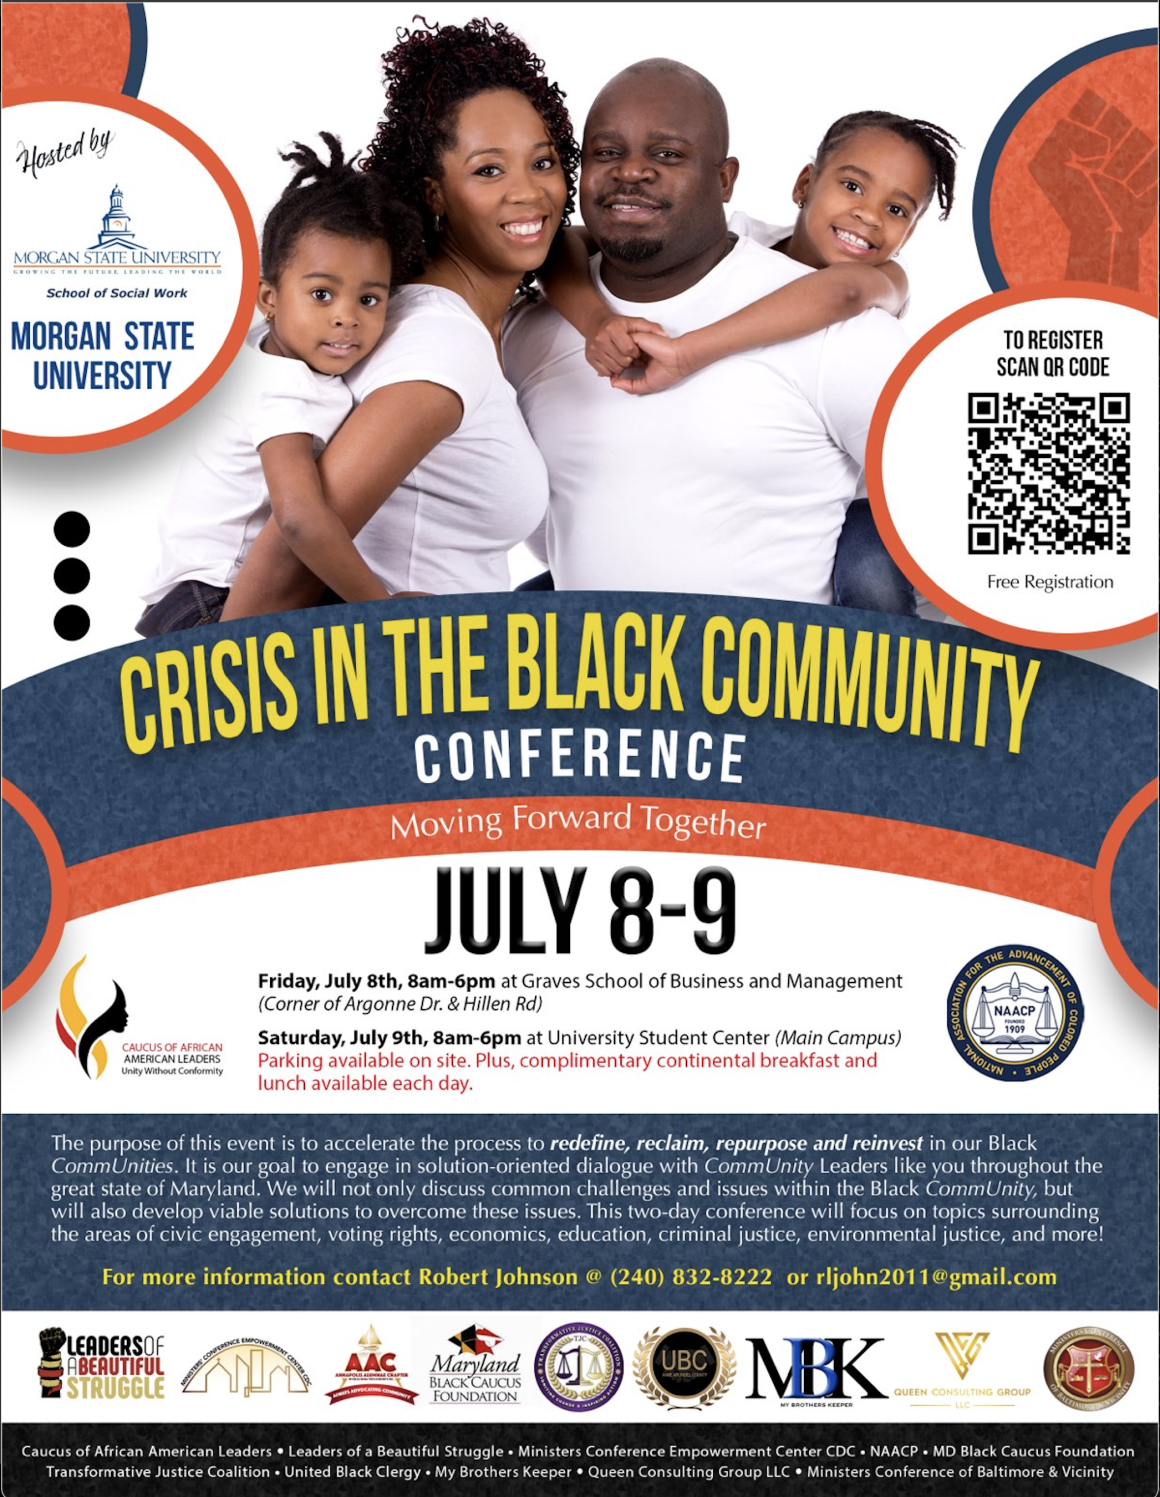 Flyer with details about the Crisis in the Black Community Conference being hosted by the NAACP at Morgan State University. The event is July 8-9, 2022, from 8 a.m. - 6 p.m. both days.